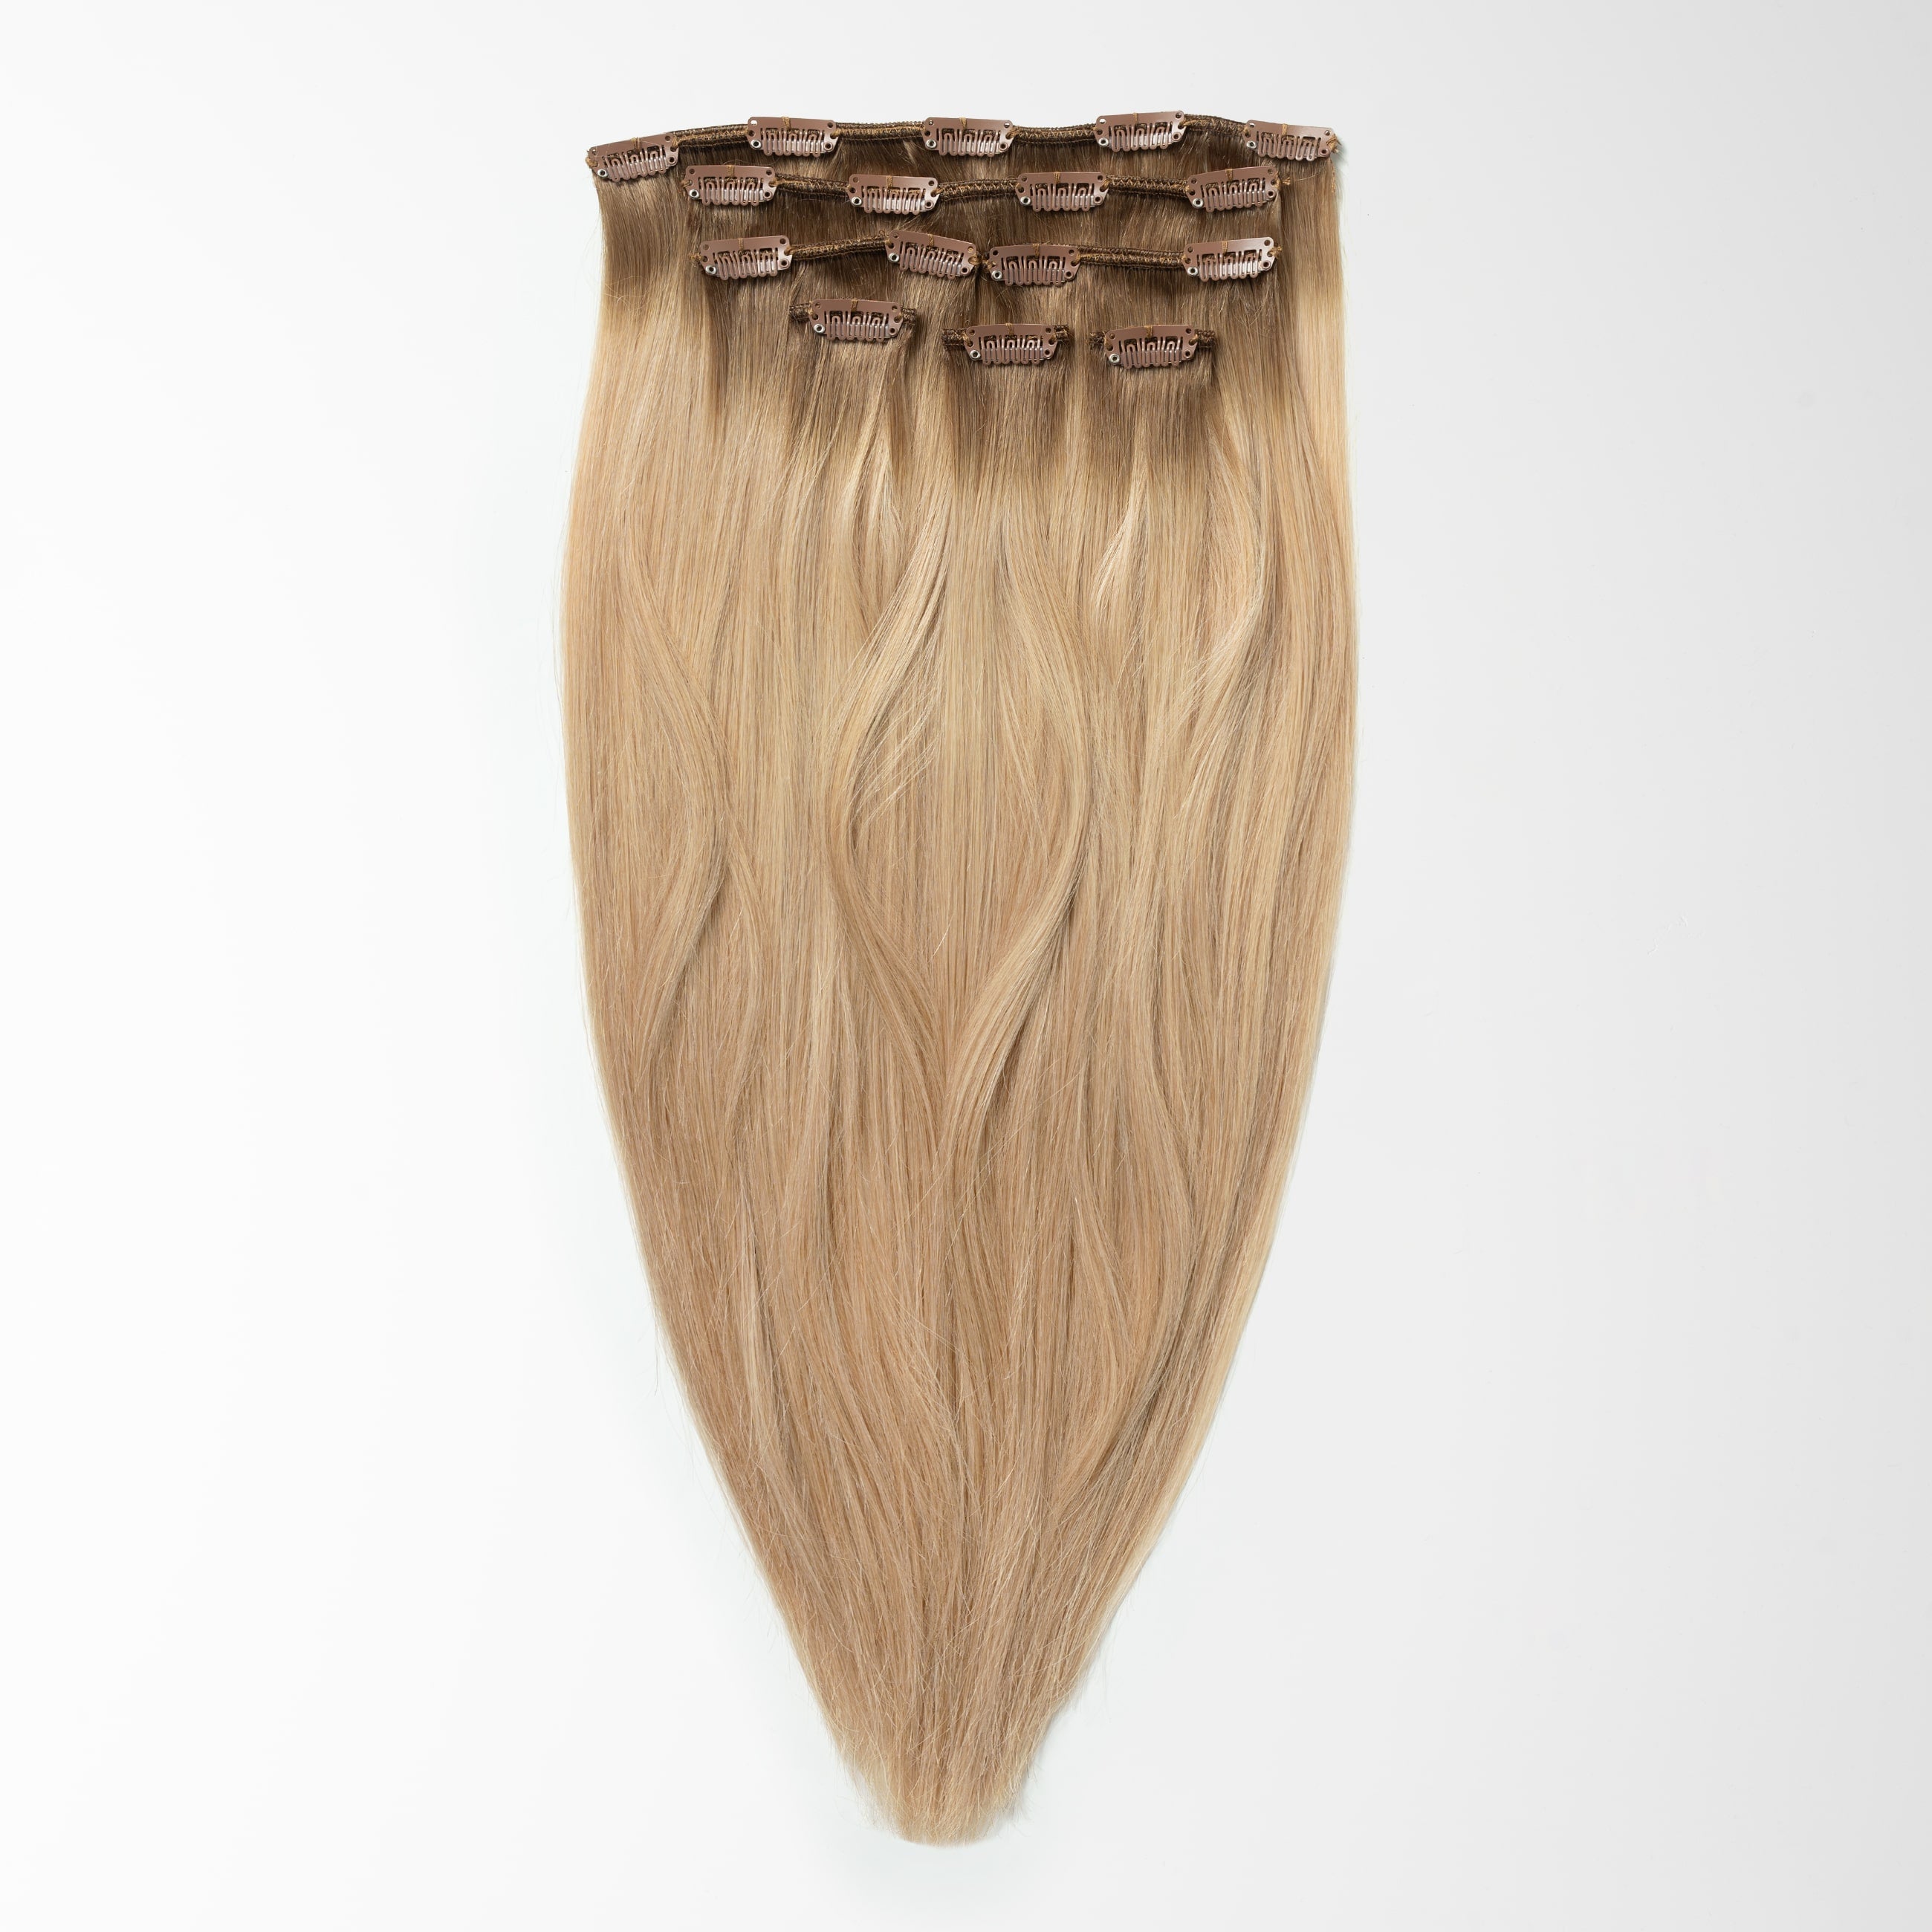 Clip on - Natural Blonde Root 5B+15